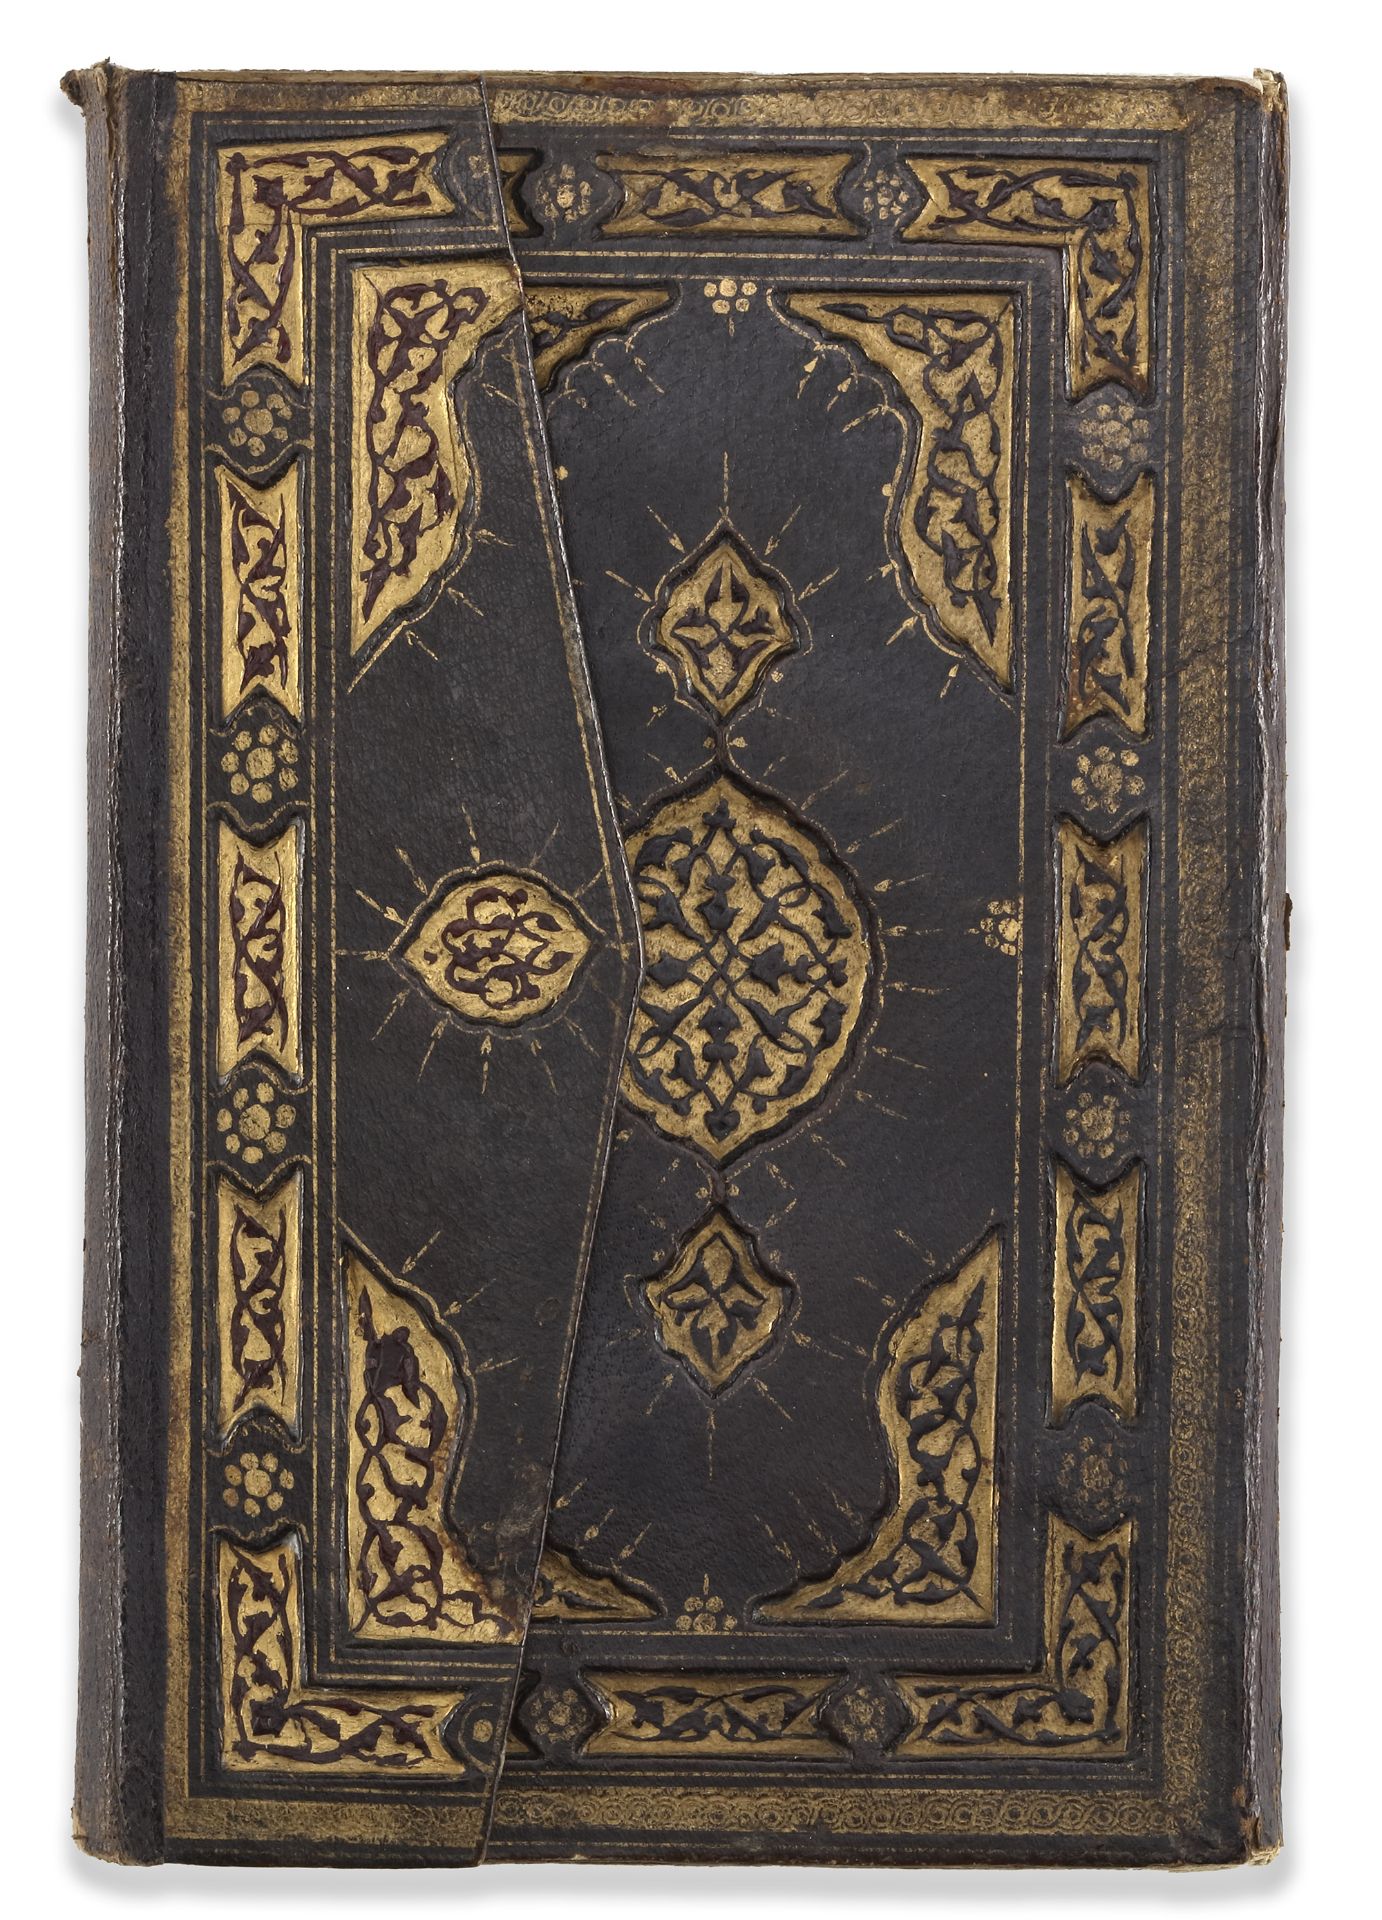 AN OTTOMAN QURAN SIGNED BY SULEIMAN AL-QAE'I AND DATED 1191 AH/1777 AD - Image 4 of 6